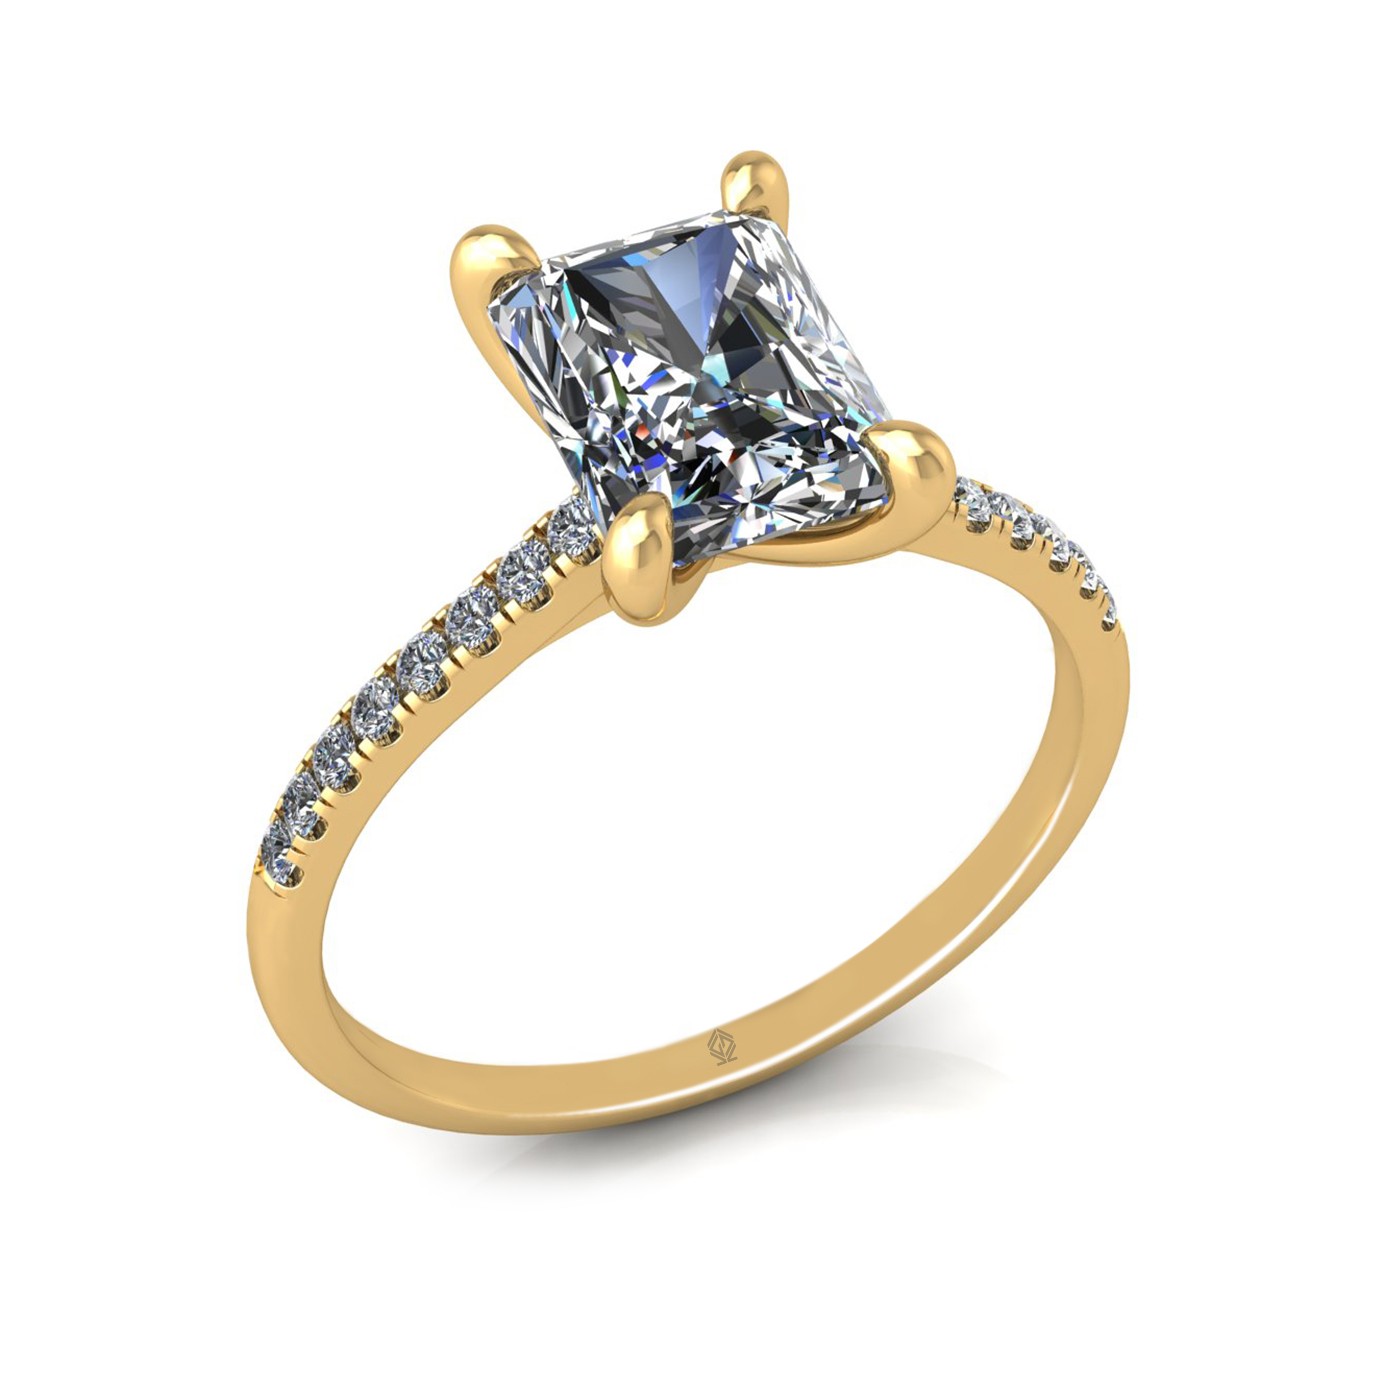 18k yellow gold  2,00 ct 4 prongs radiant cut diamond engagement ring with whisper thin pavÉ set band